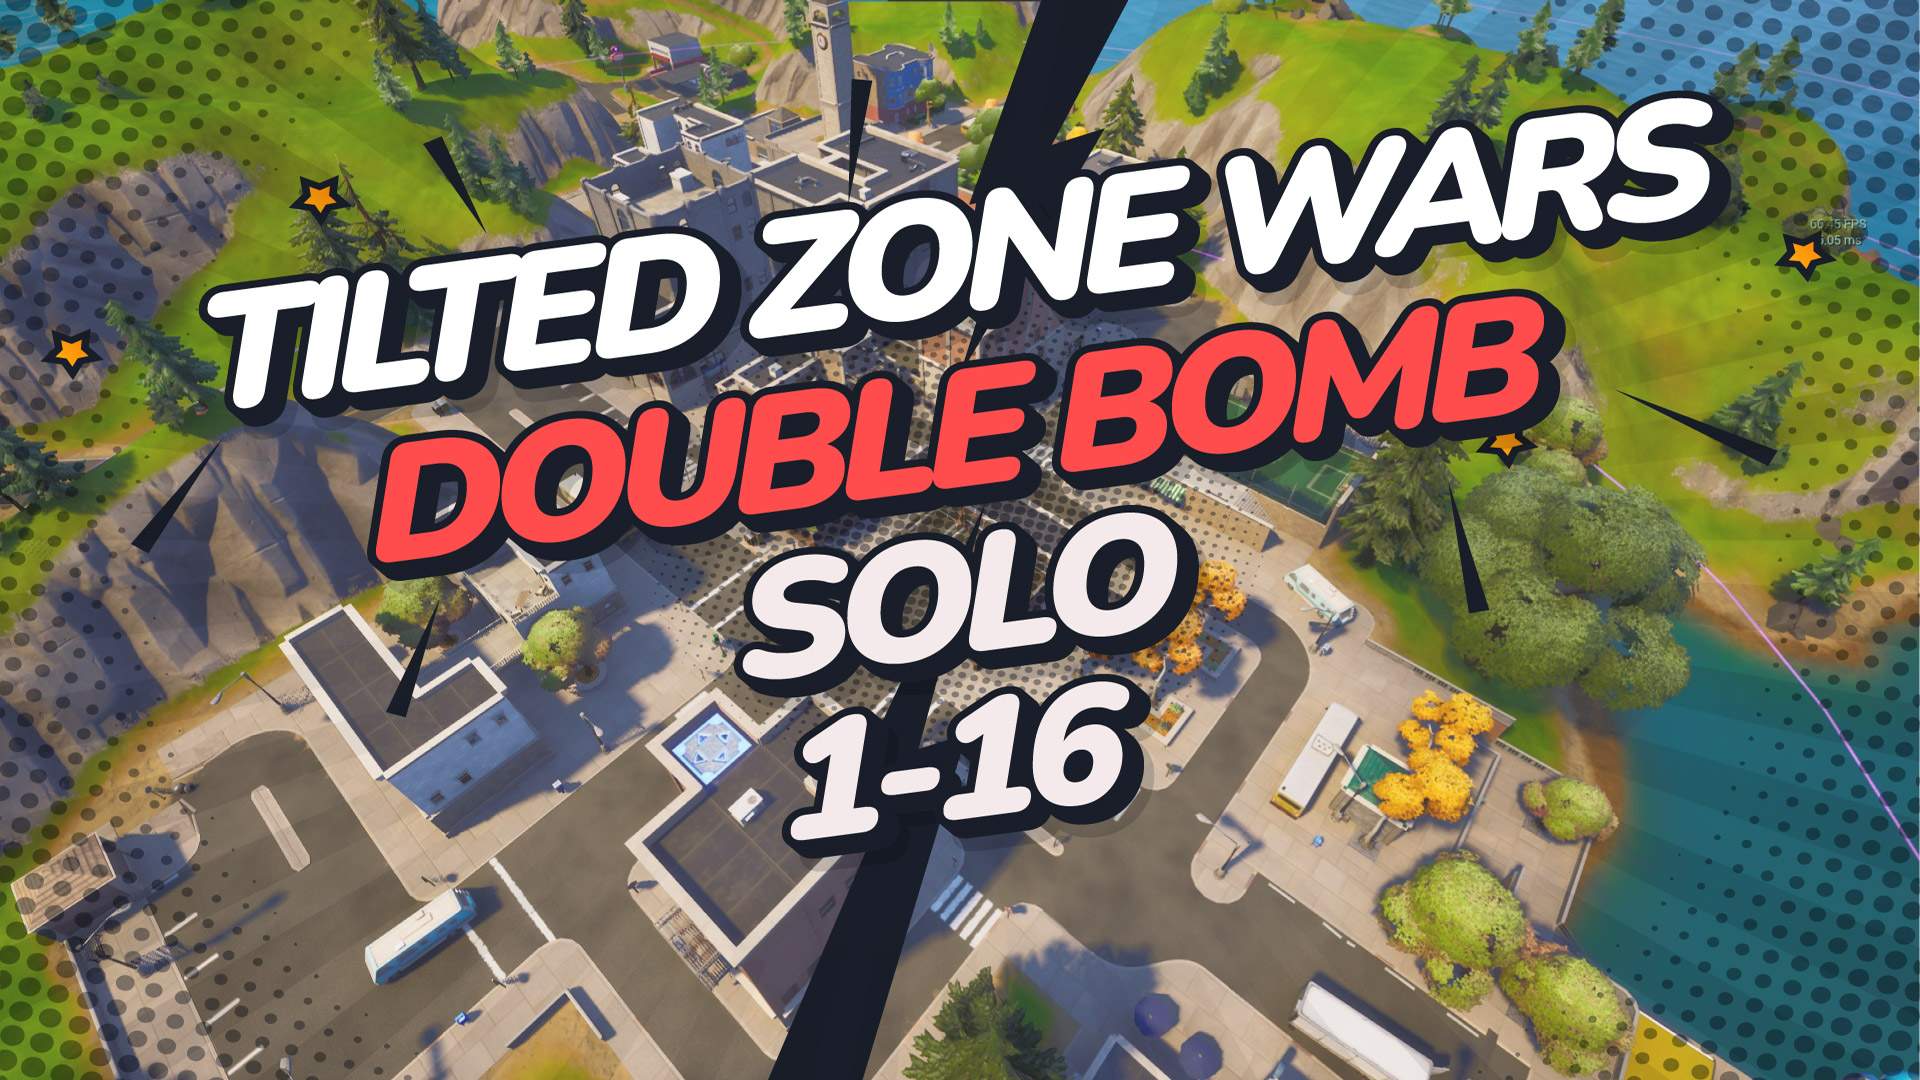 TILTED ZONE WARS ✨ Double Bomb image 2